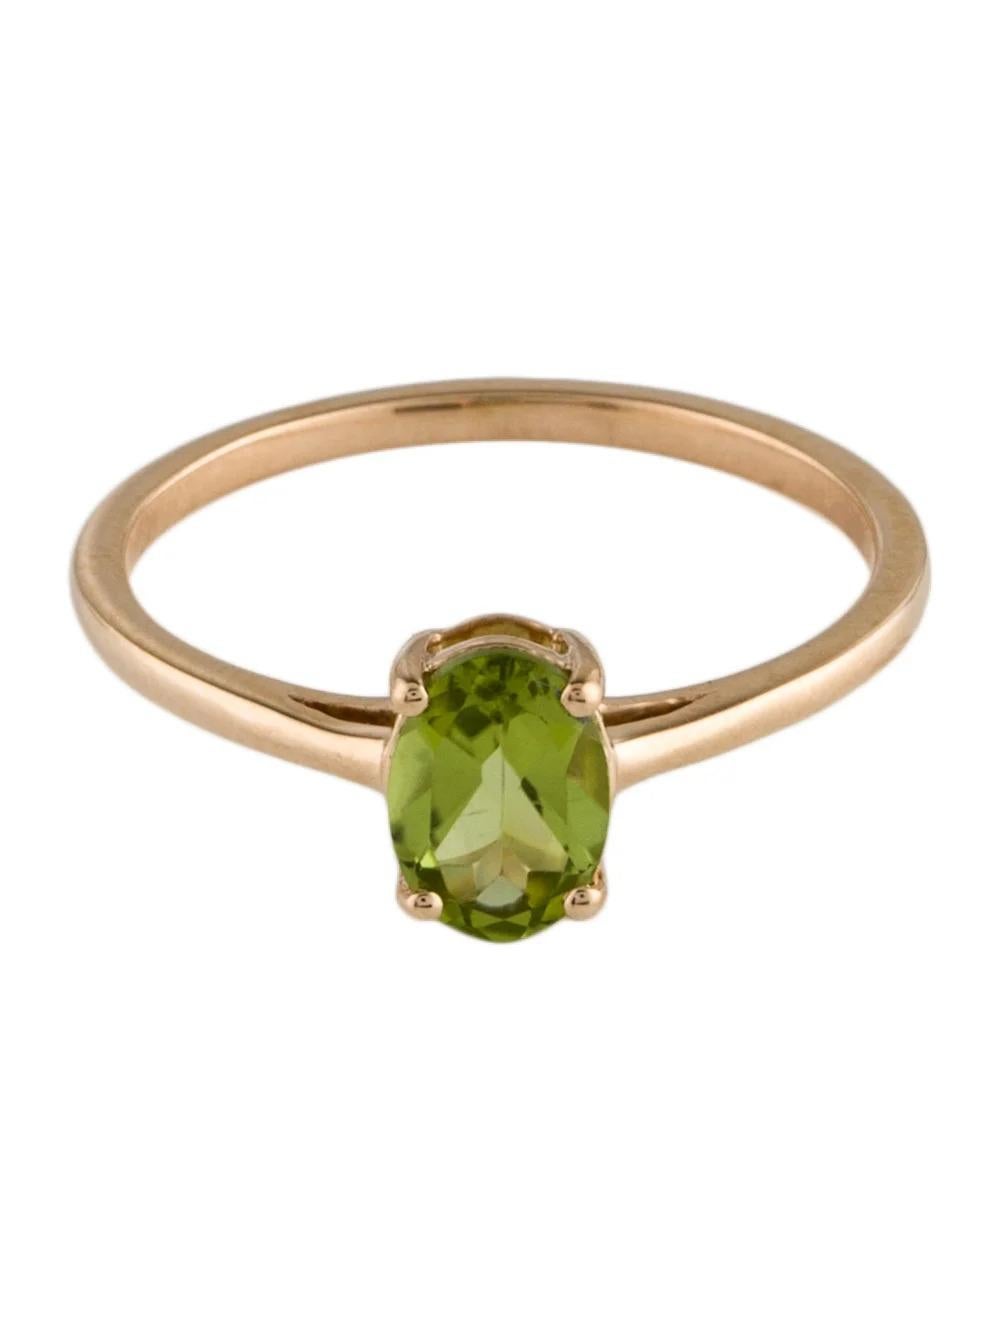 Oval Cut Exquisite 14K Peridot Cocktail Ring Size 6.75 - Timeless Statement Jewelry For Sale